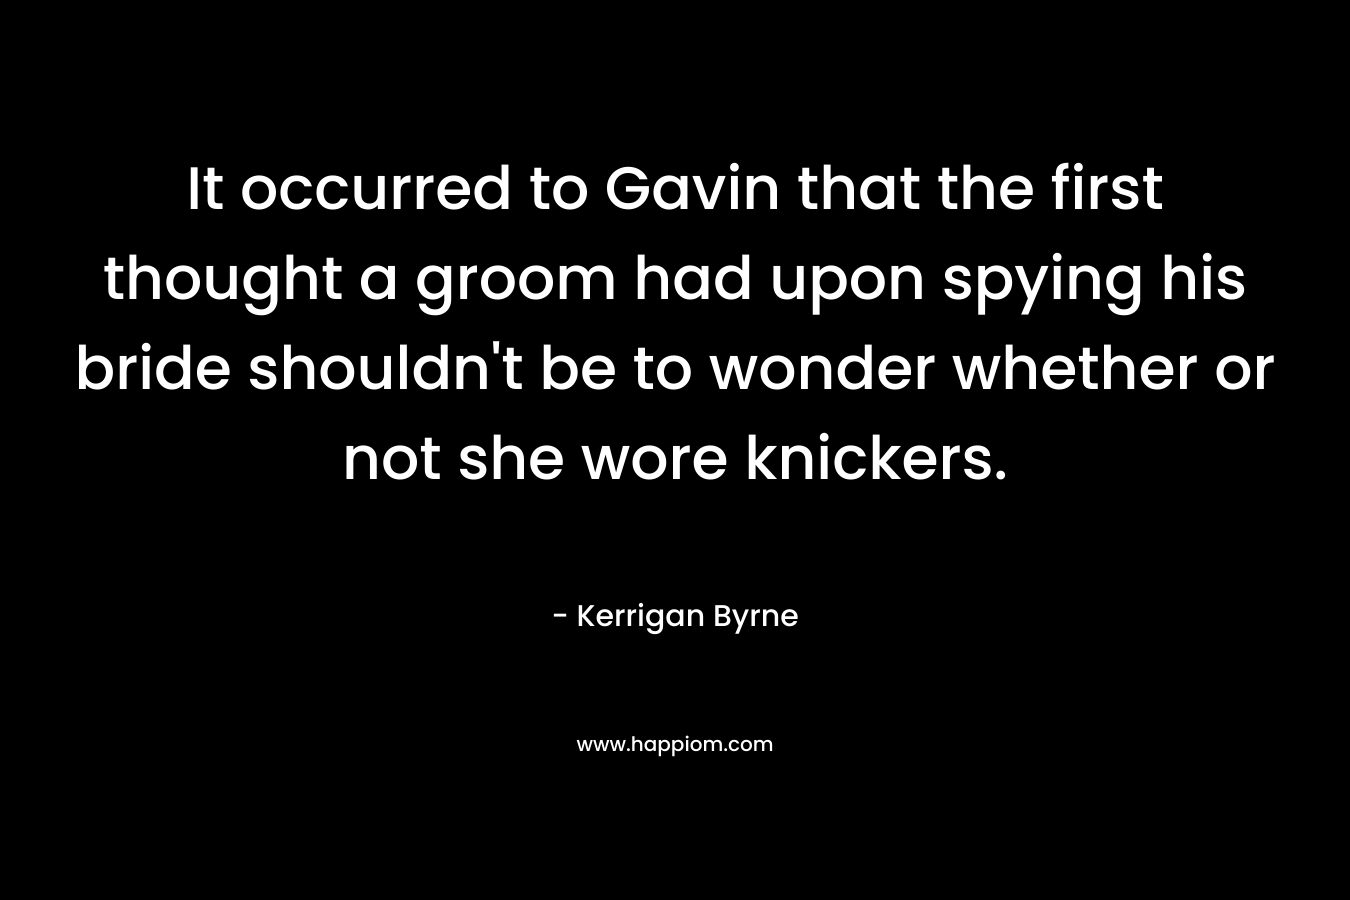 It occurred to Gavin that the first thought a groom had upon spying his bride shouldn’t be to wonder whether or not she wore knickers. – Kerrigan Byrne